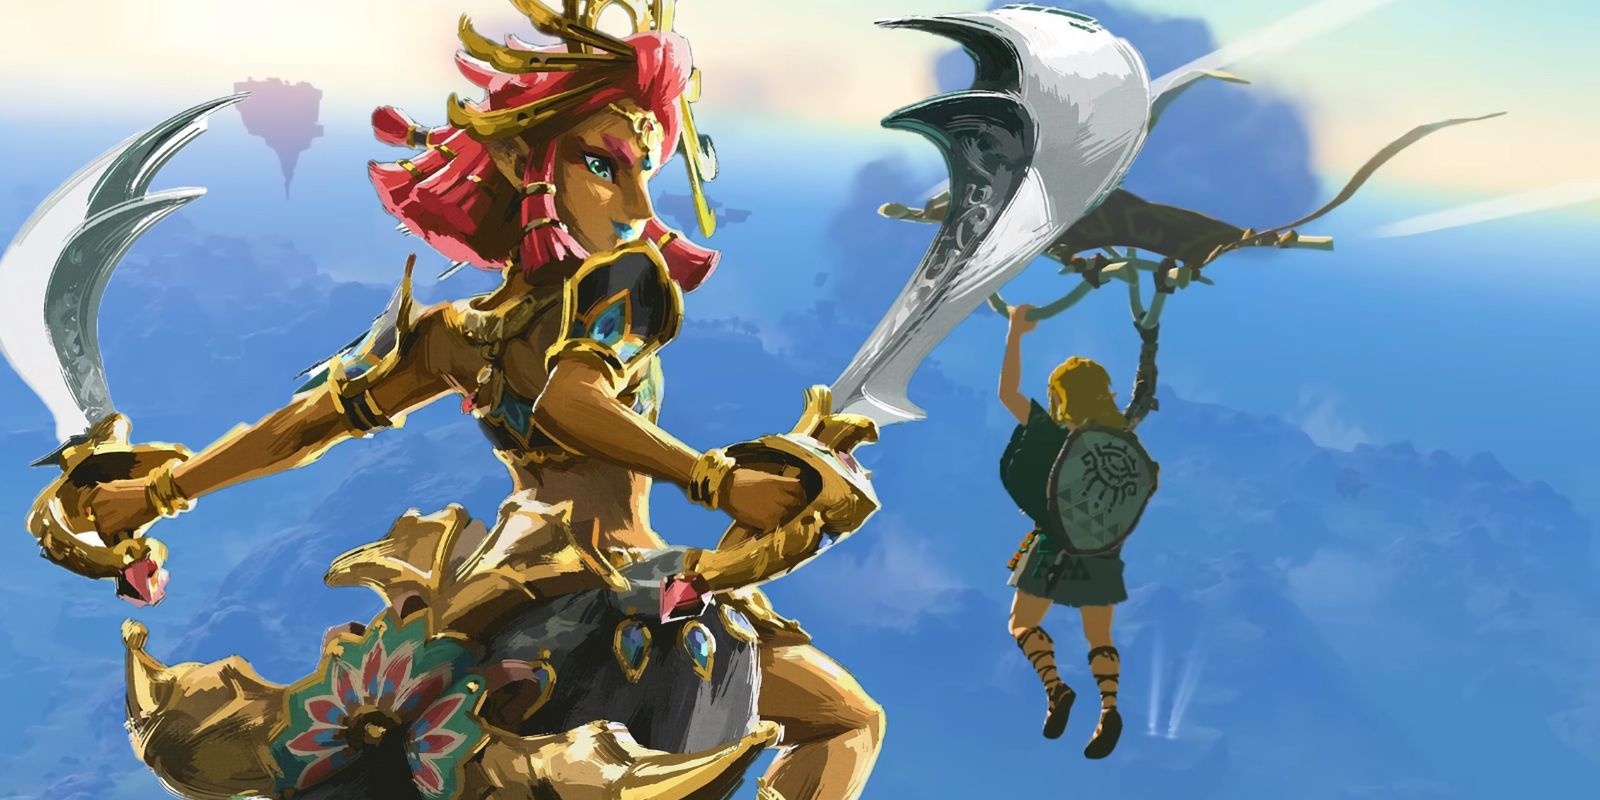 Artwork of Riju from Tears of the Kingdom over a screenshot from the game's third trailer showing Link using his paraglider far above the ground.